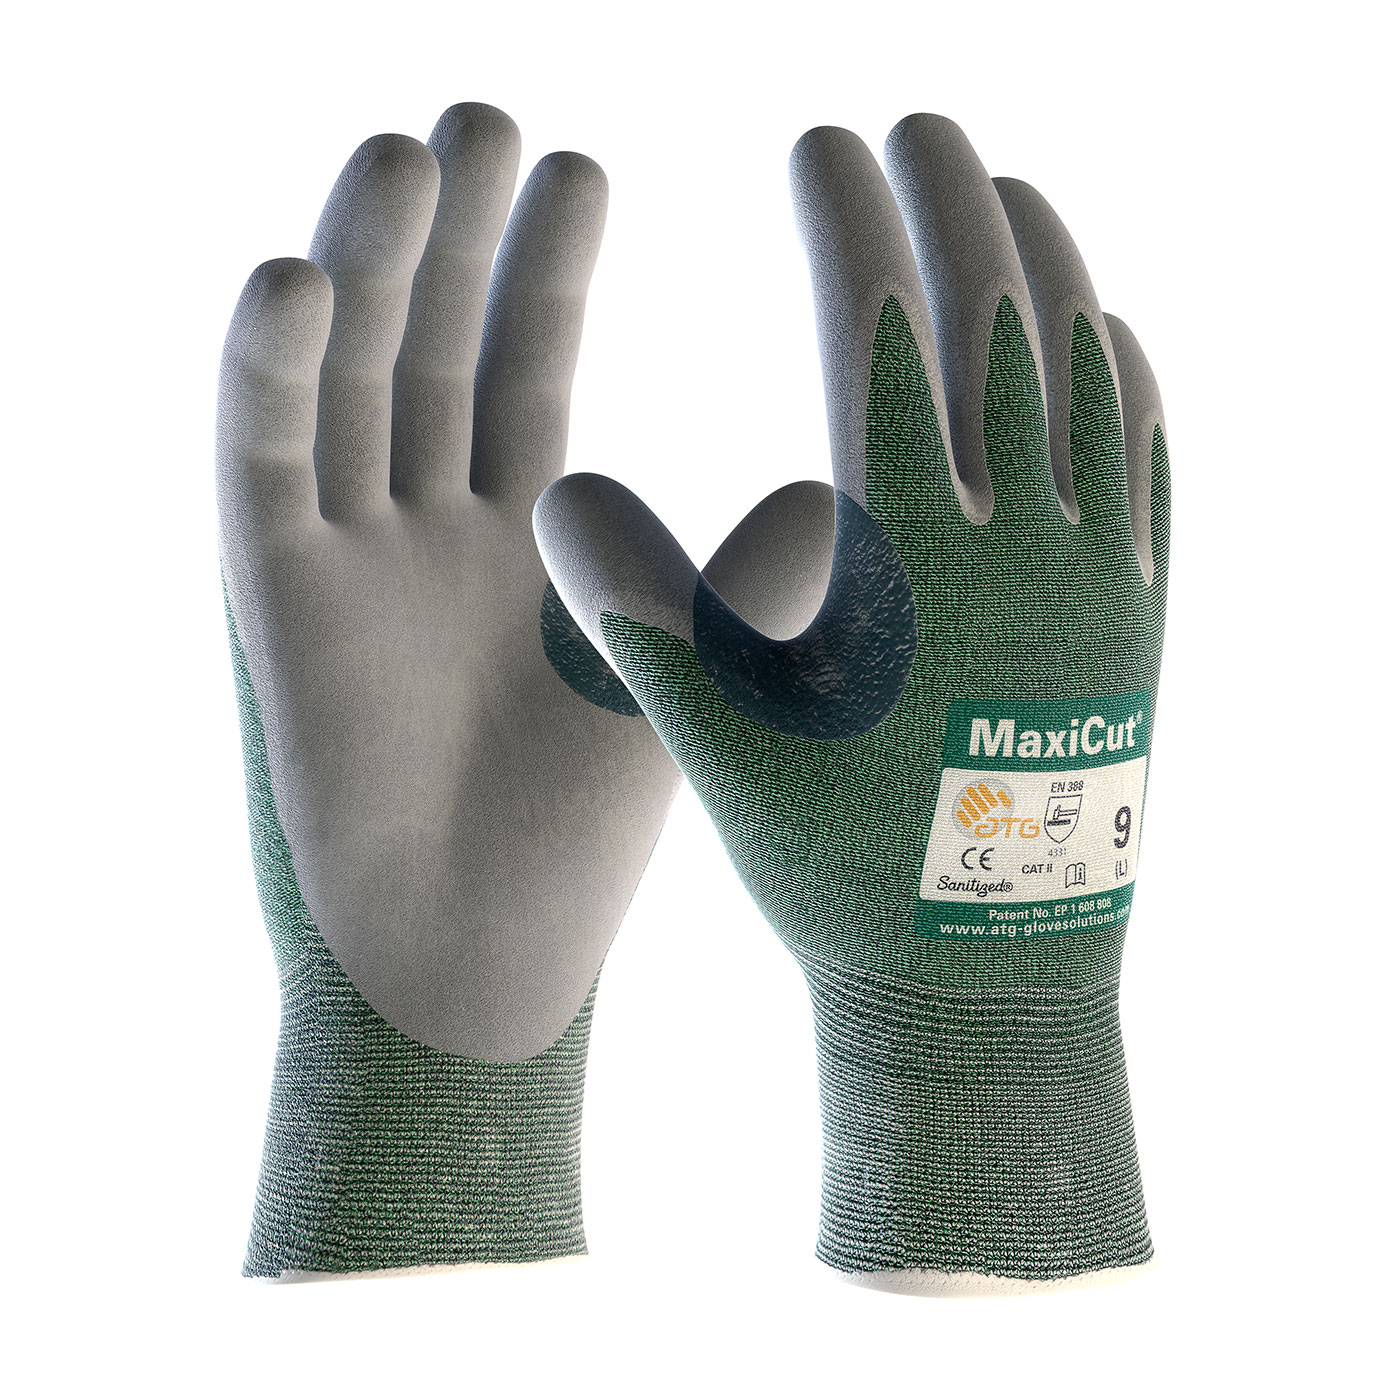 PIP 18-570/S MaxiCut Seamless Knit Engineered Yarn Glove with Nitrile Coated MicroFoam Grip on Palm & Fingers - Small PID-18570S